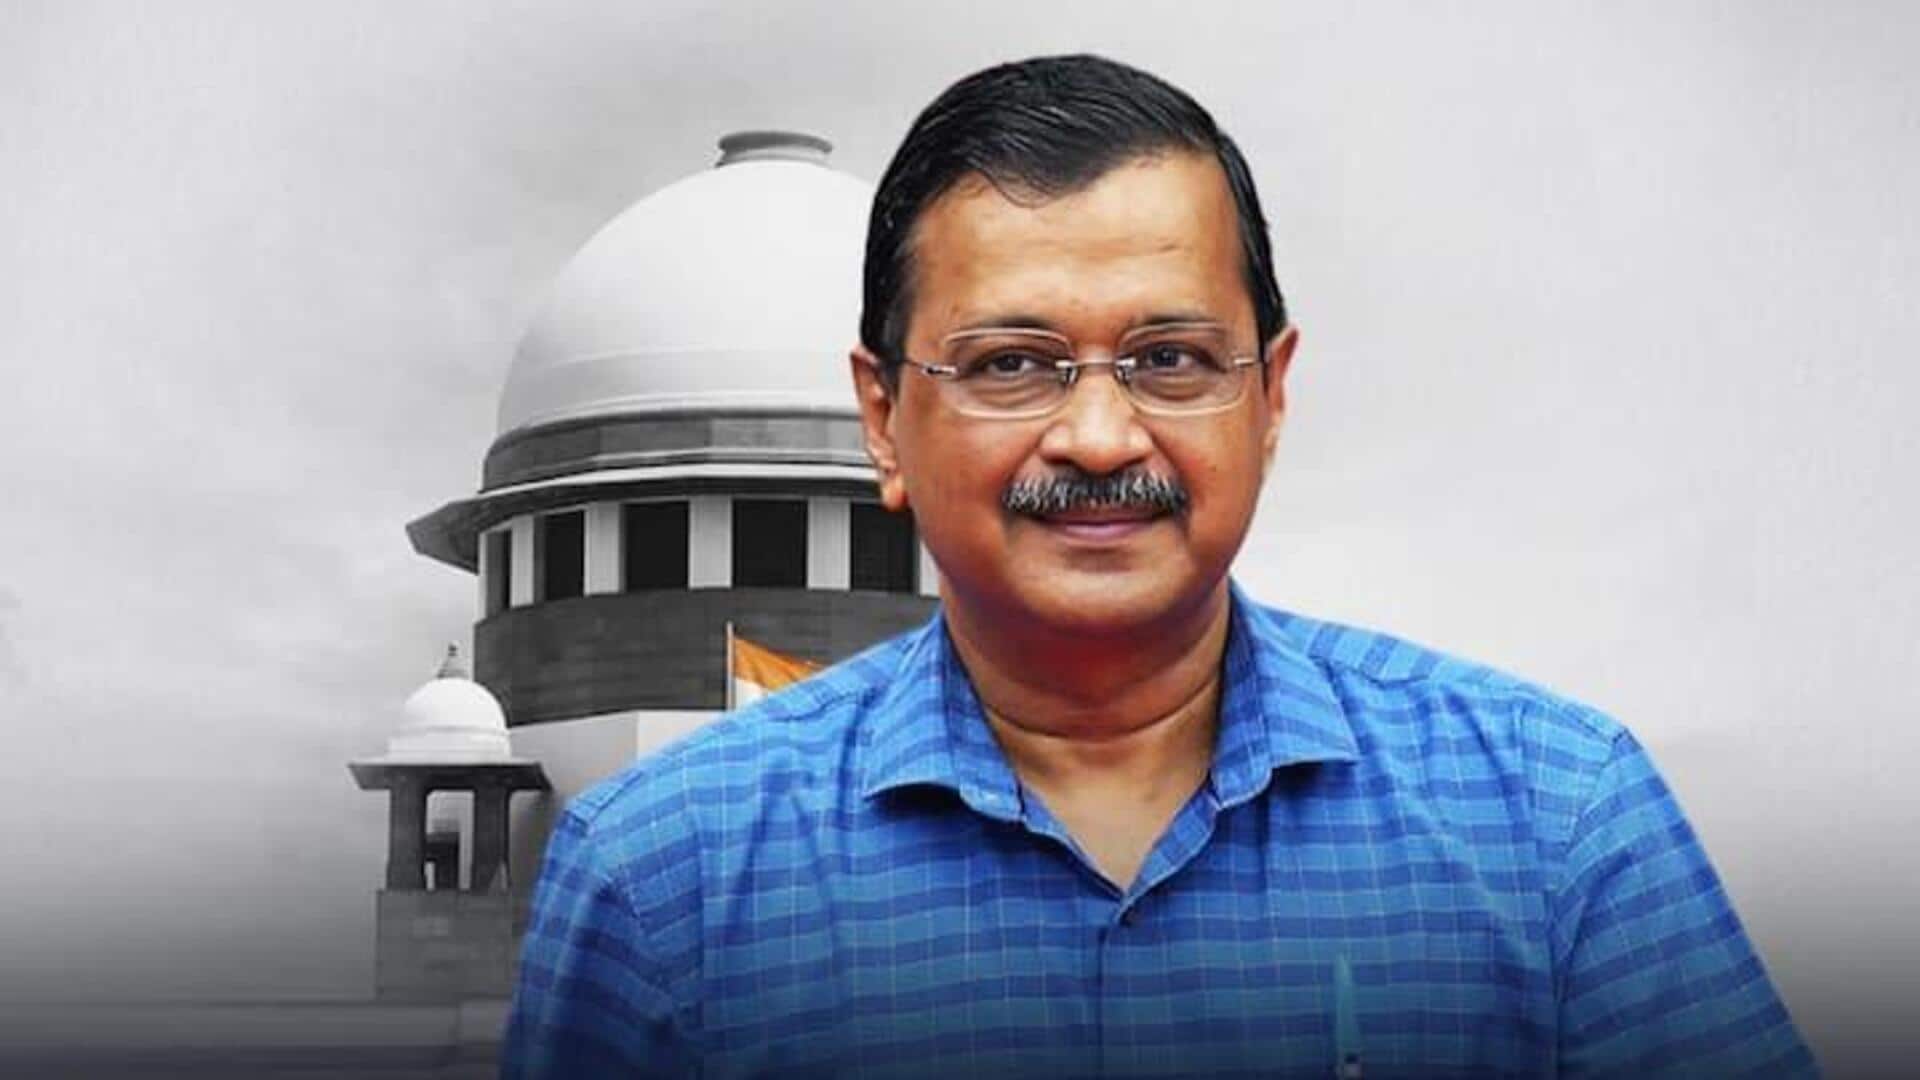 SC hears Kejriwal's plea for bail to campaign for polls